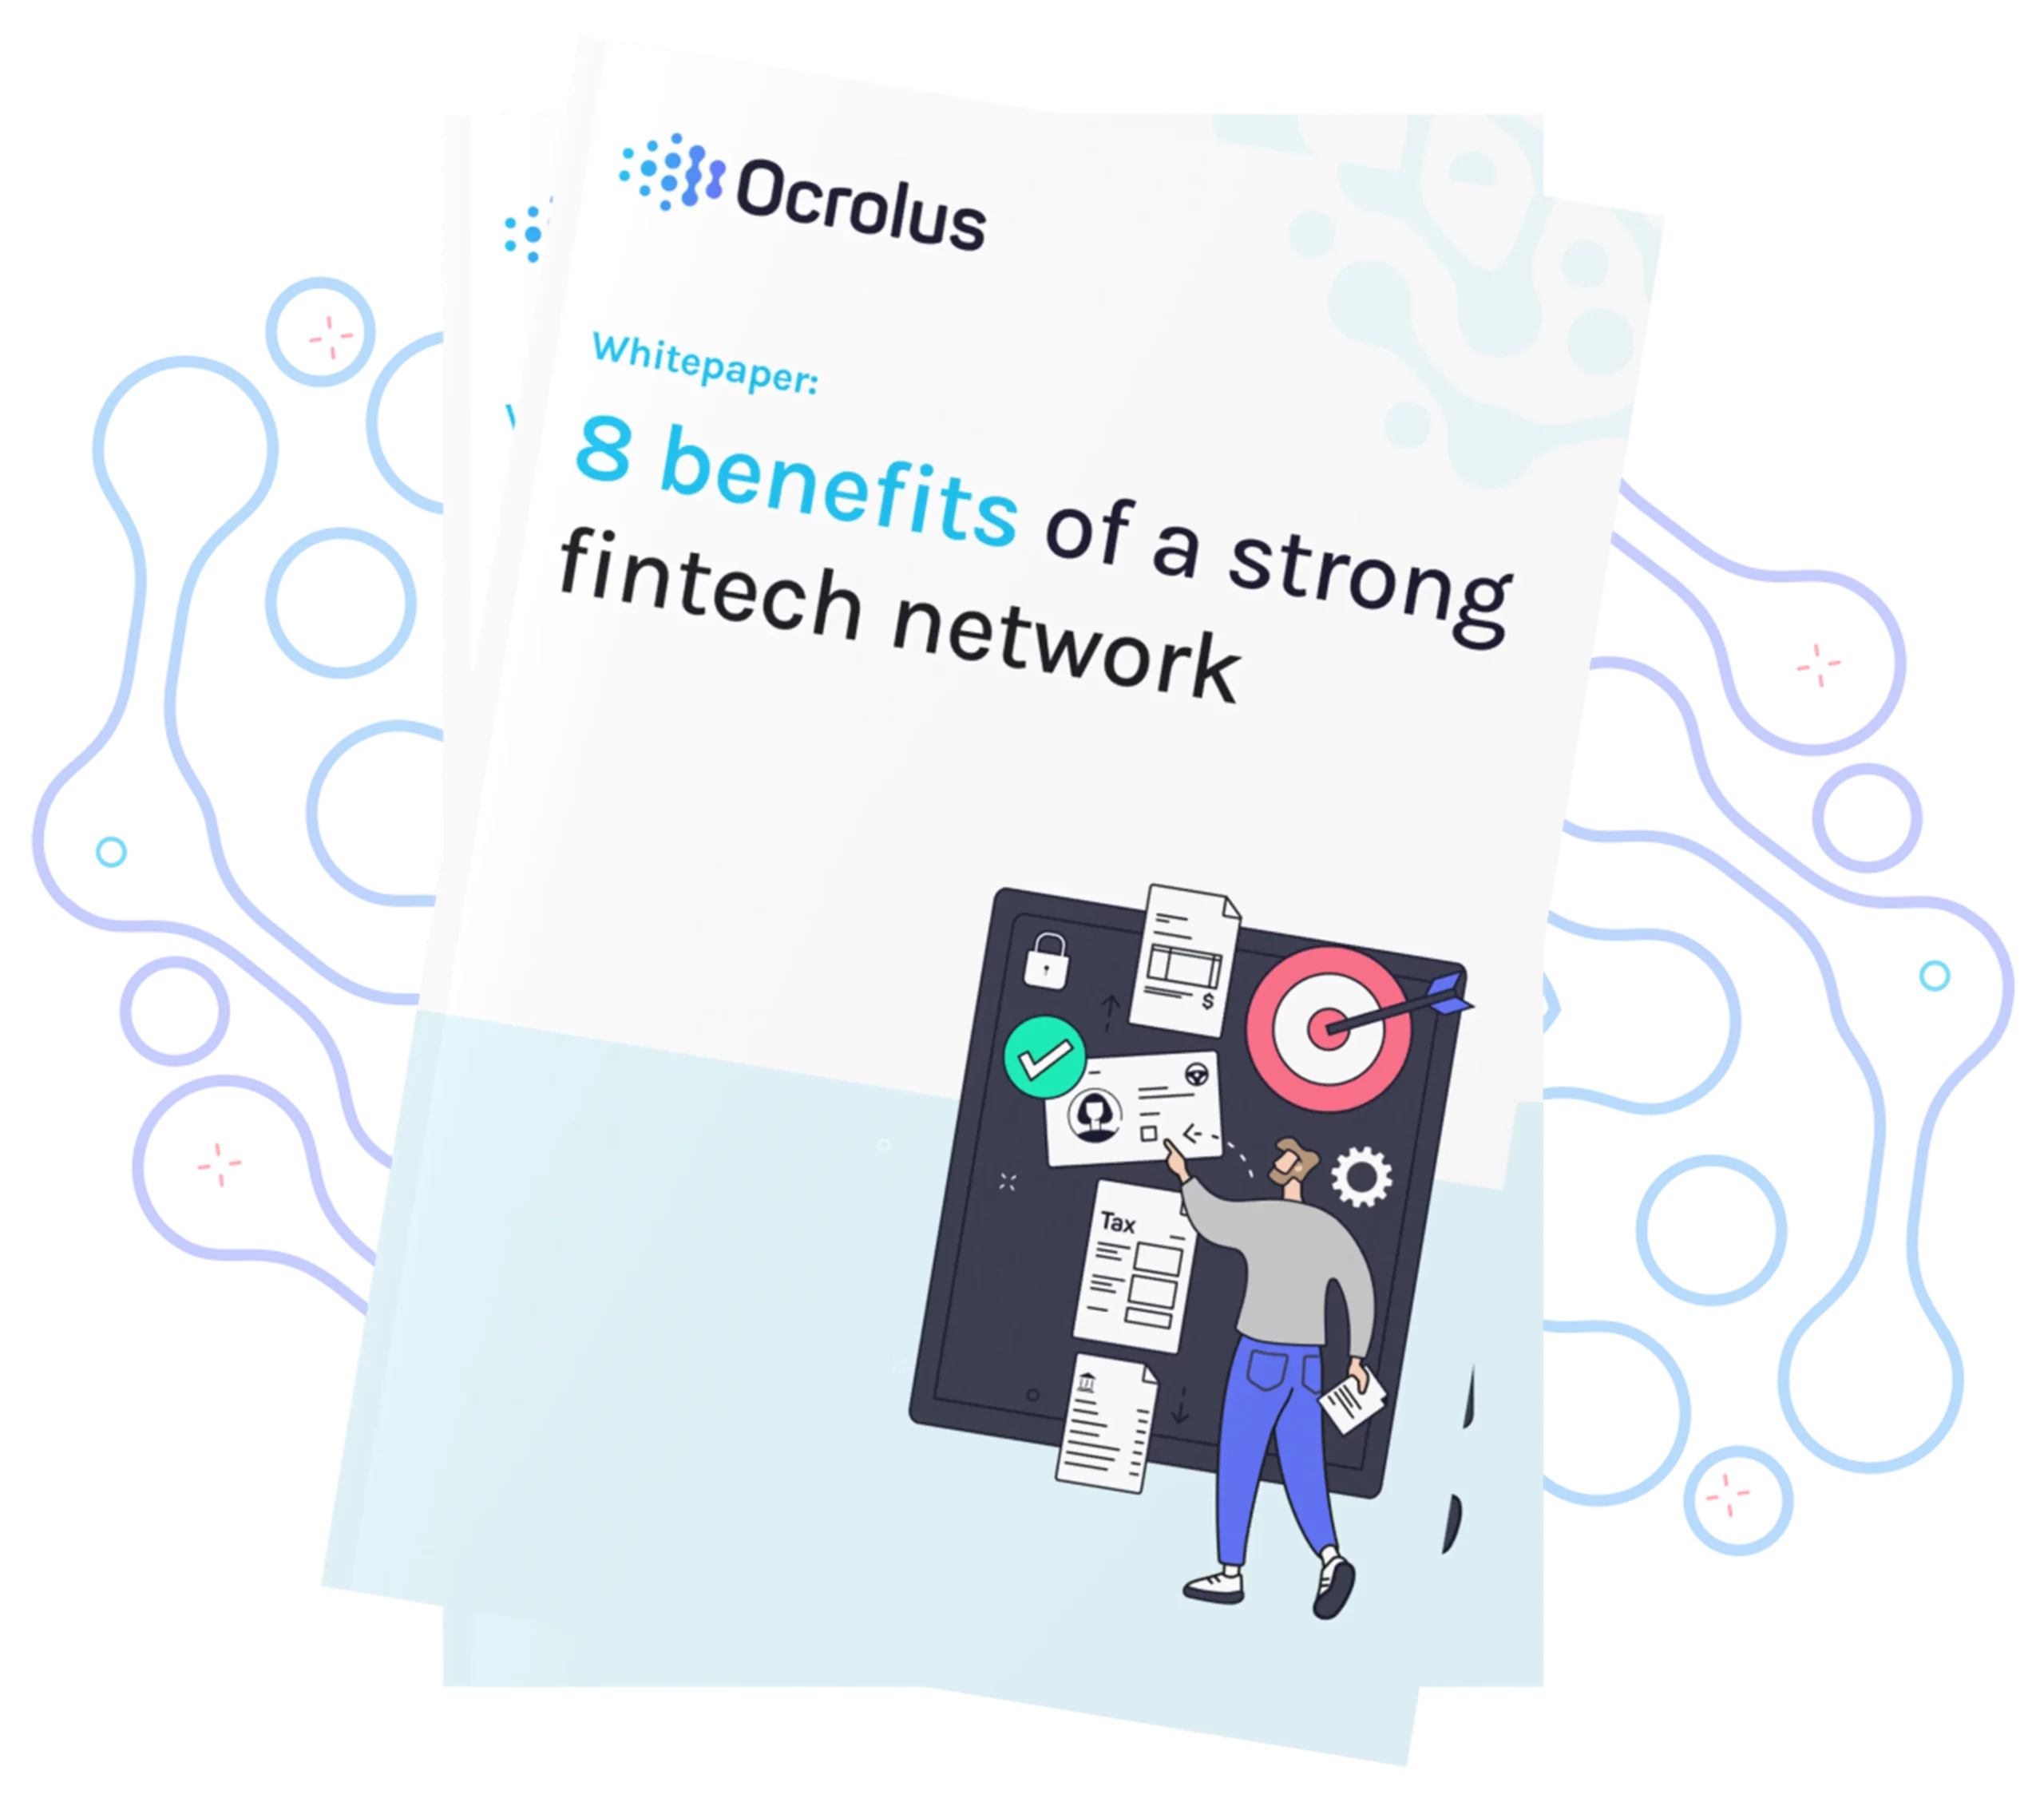 8 benefits of a strong fintech network Hero Image